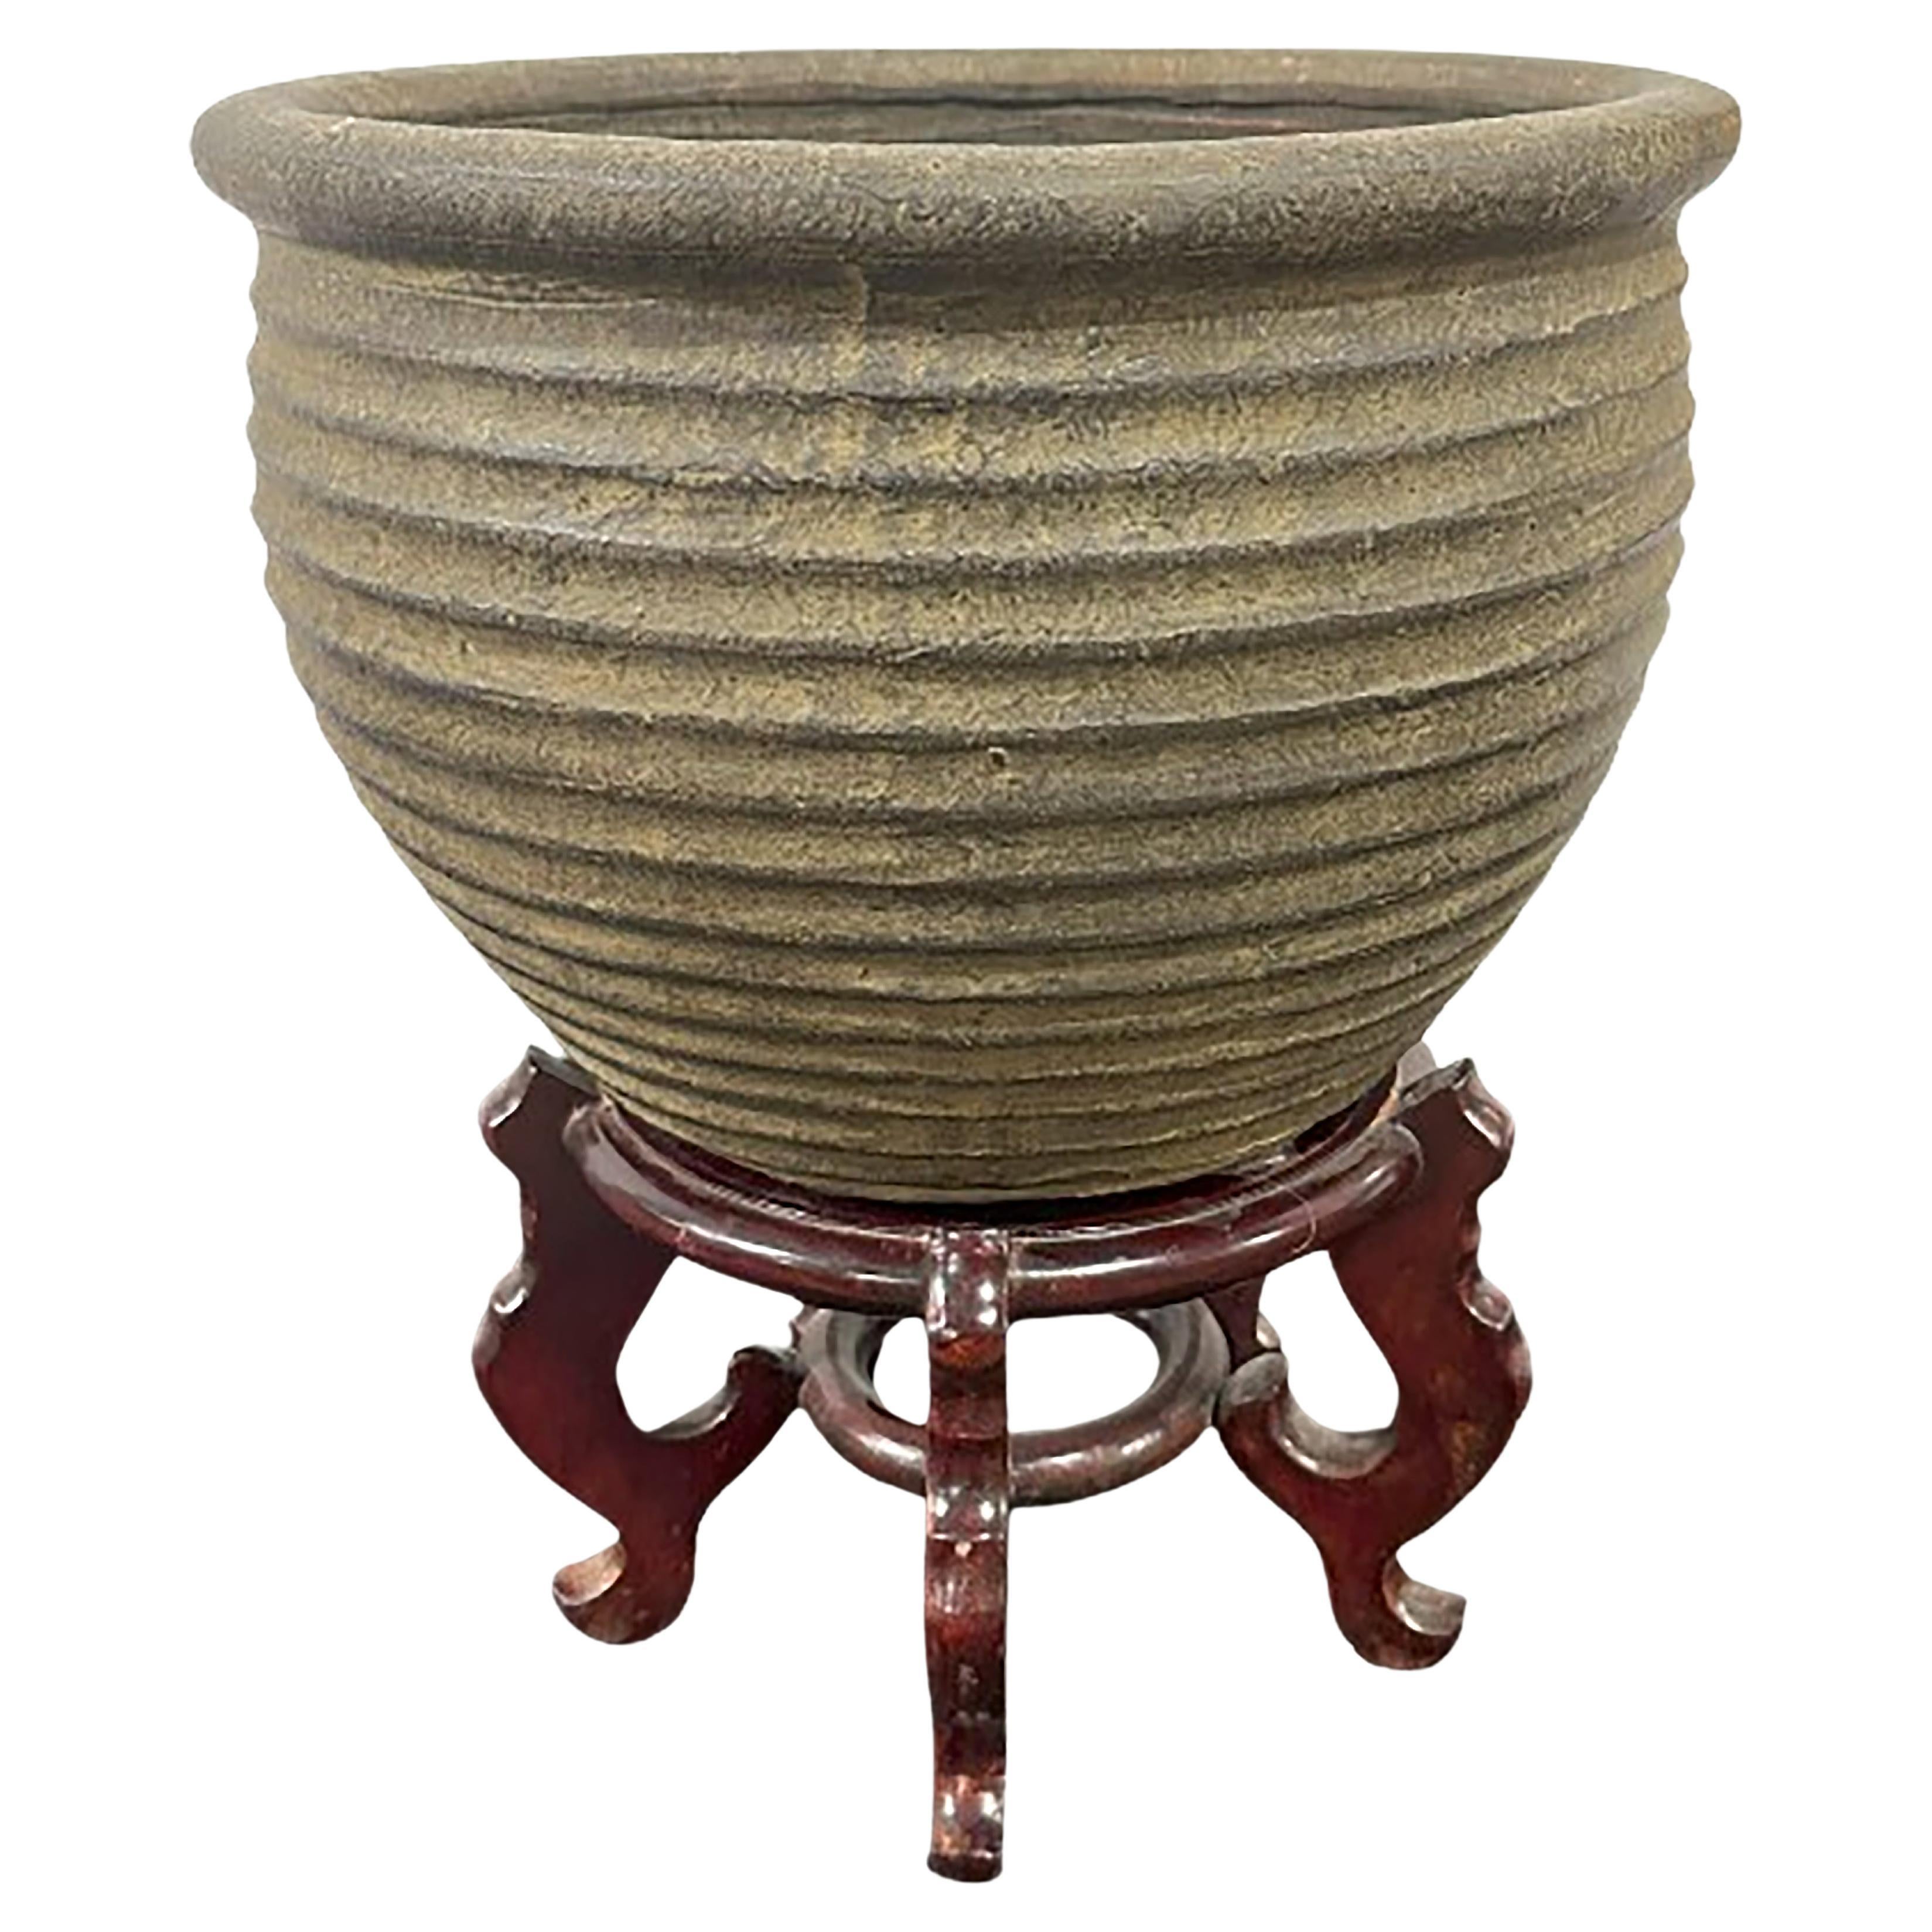   Antique Terracotta Planter with Carved Cherrywood Chinese lacquered Base For Sale